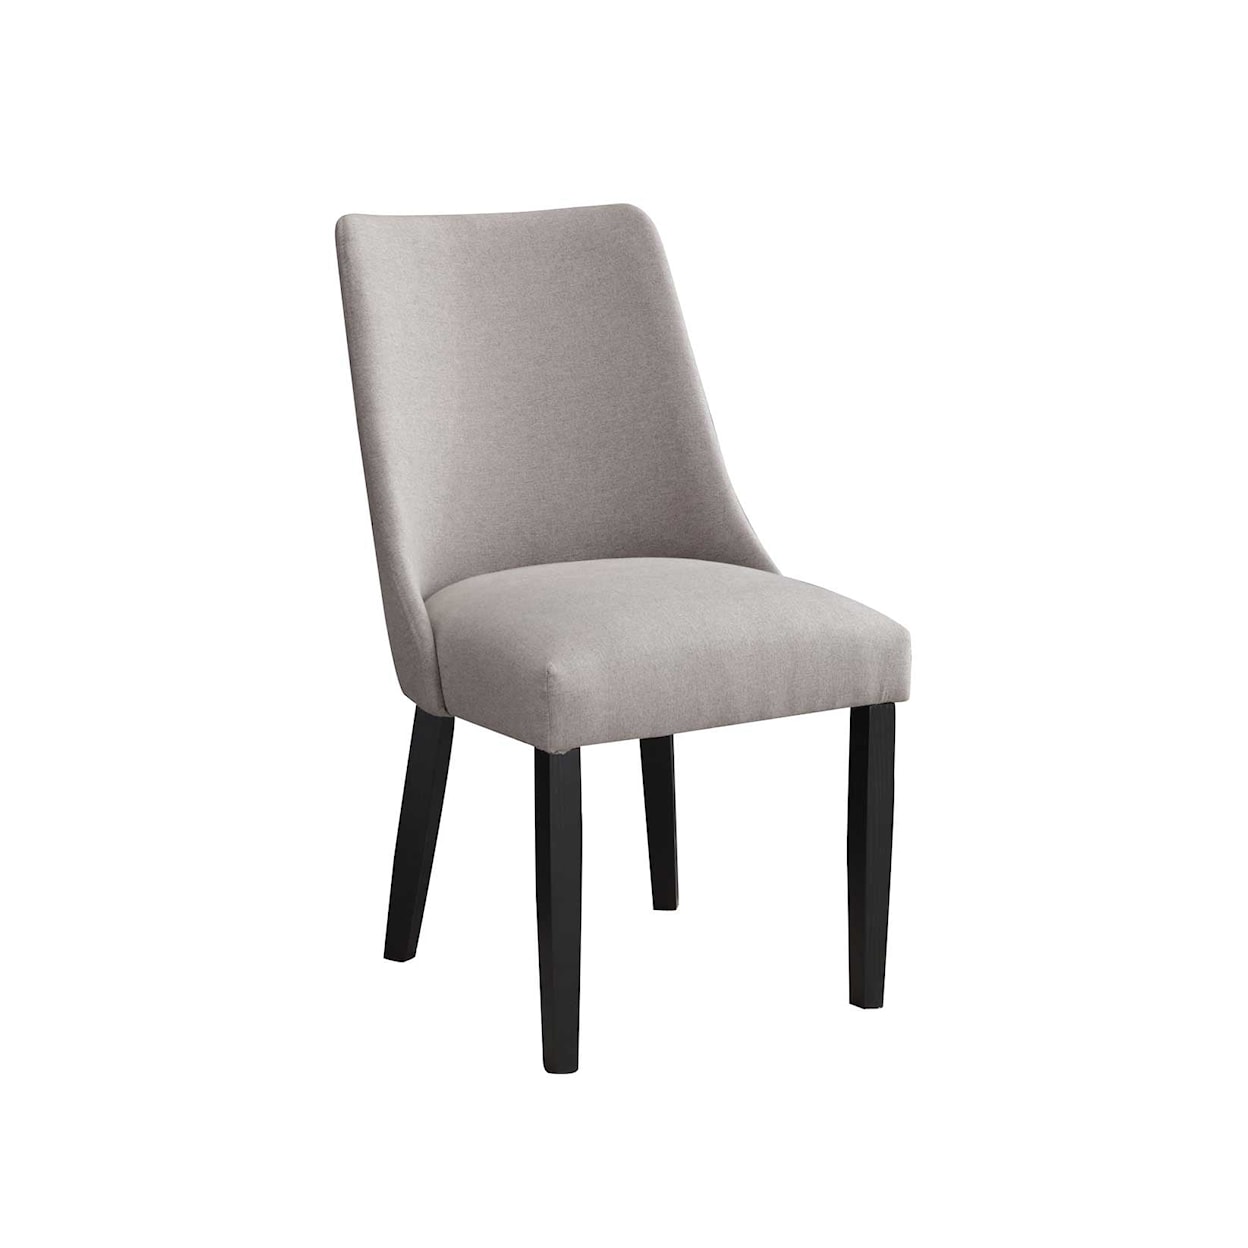 Steve Silver Xena Upholstered Side Chair in Gray